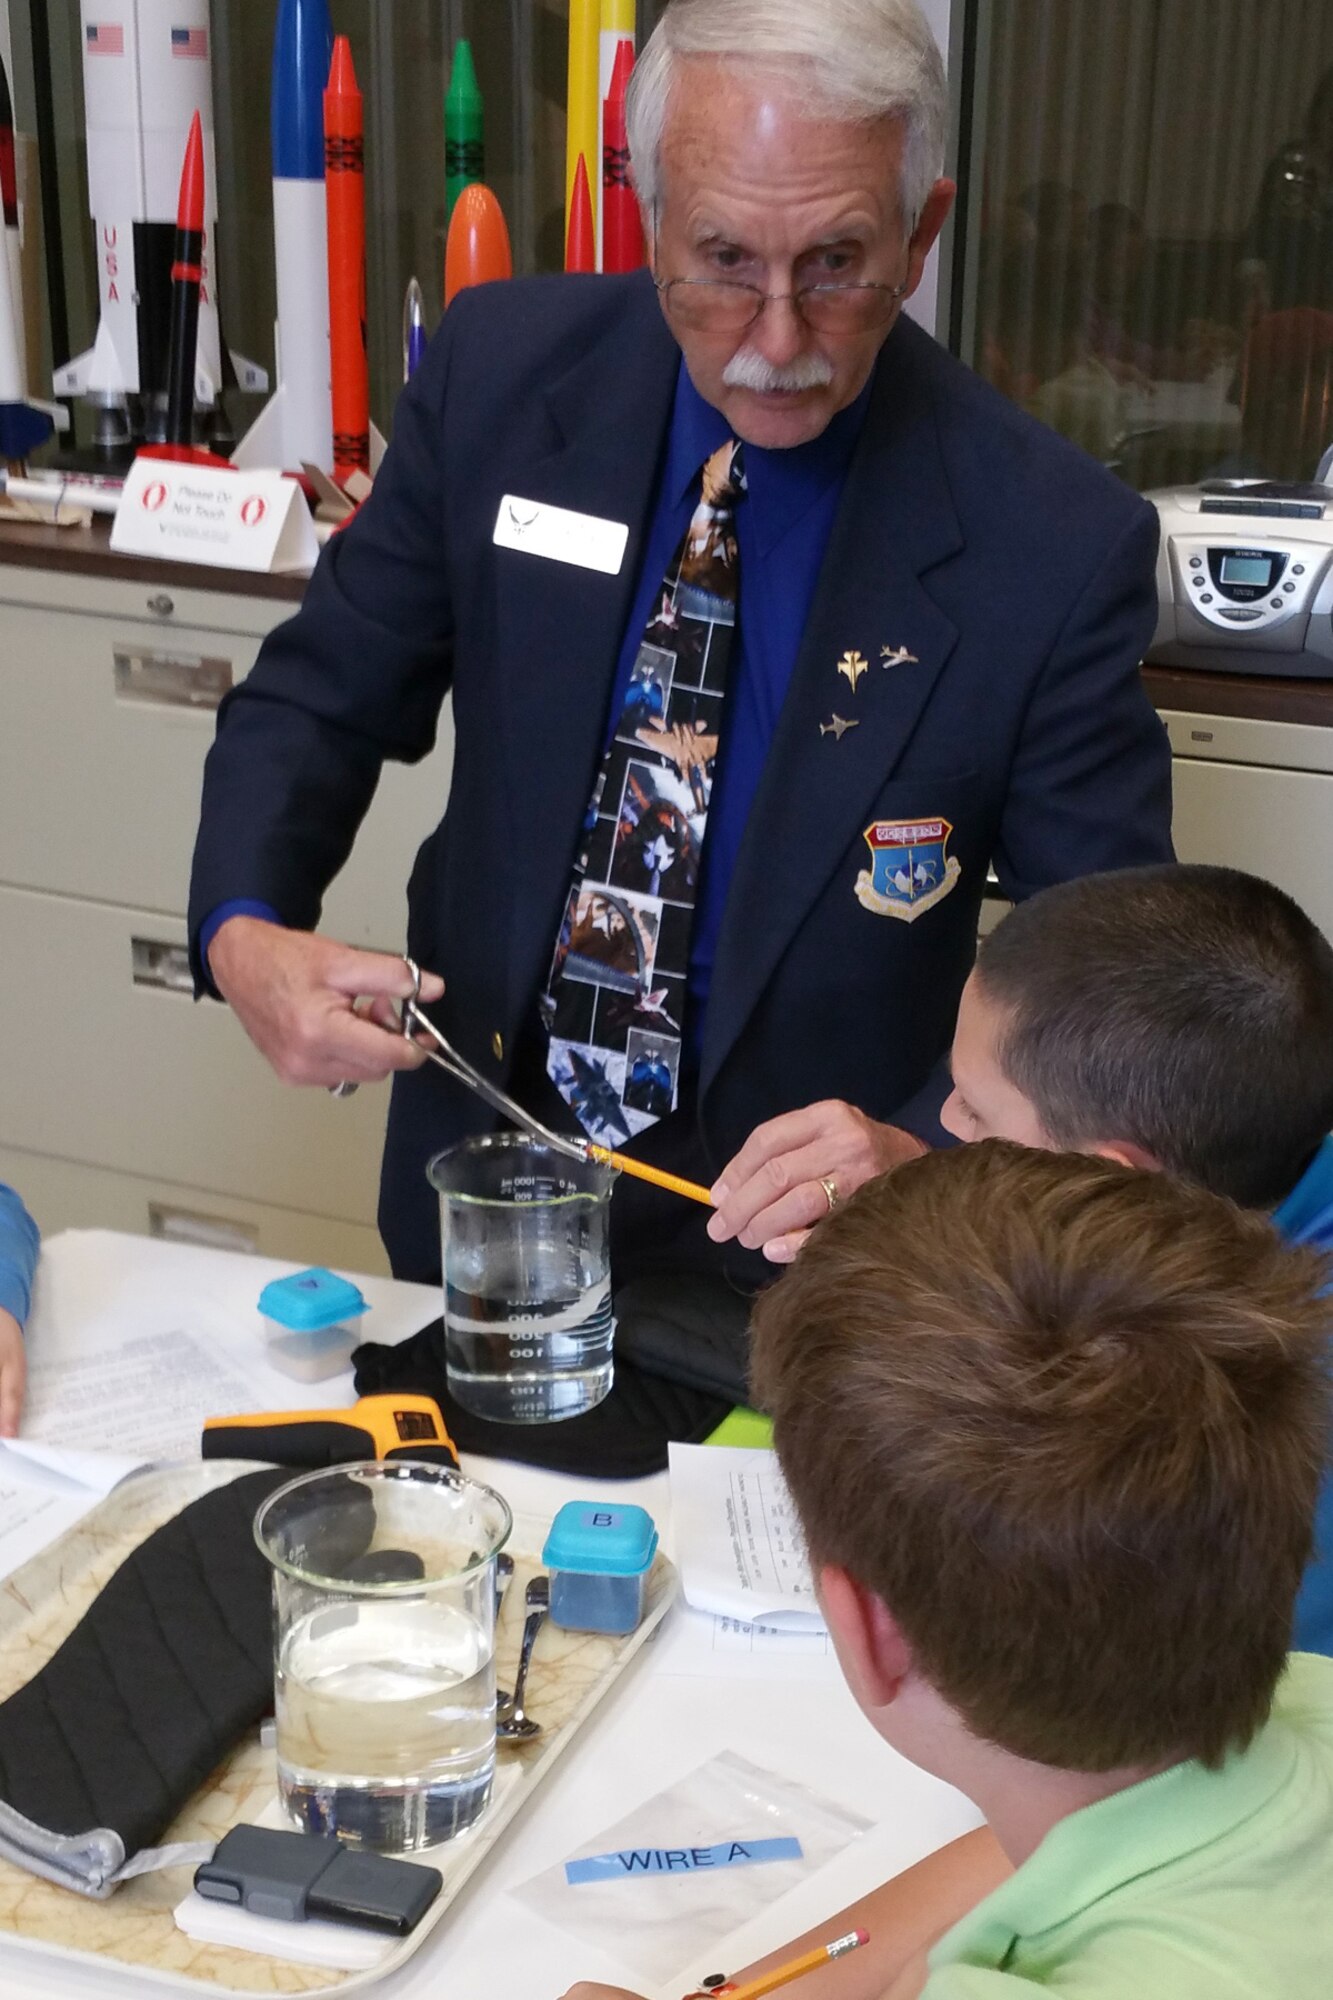 DAYTON, Ohio -- Students participate in Home School Day on April 20, 2015, at the National Museum of the U.S. Air Force. (U.S. Air Force photo)